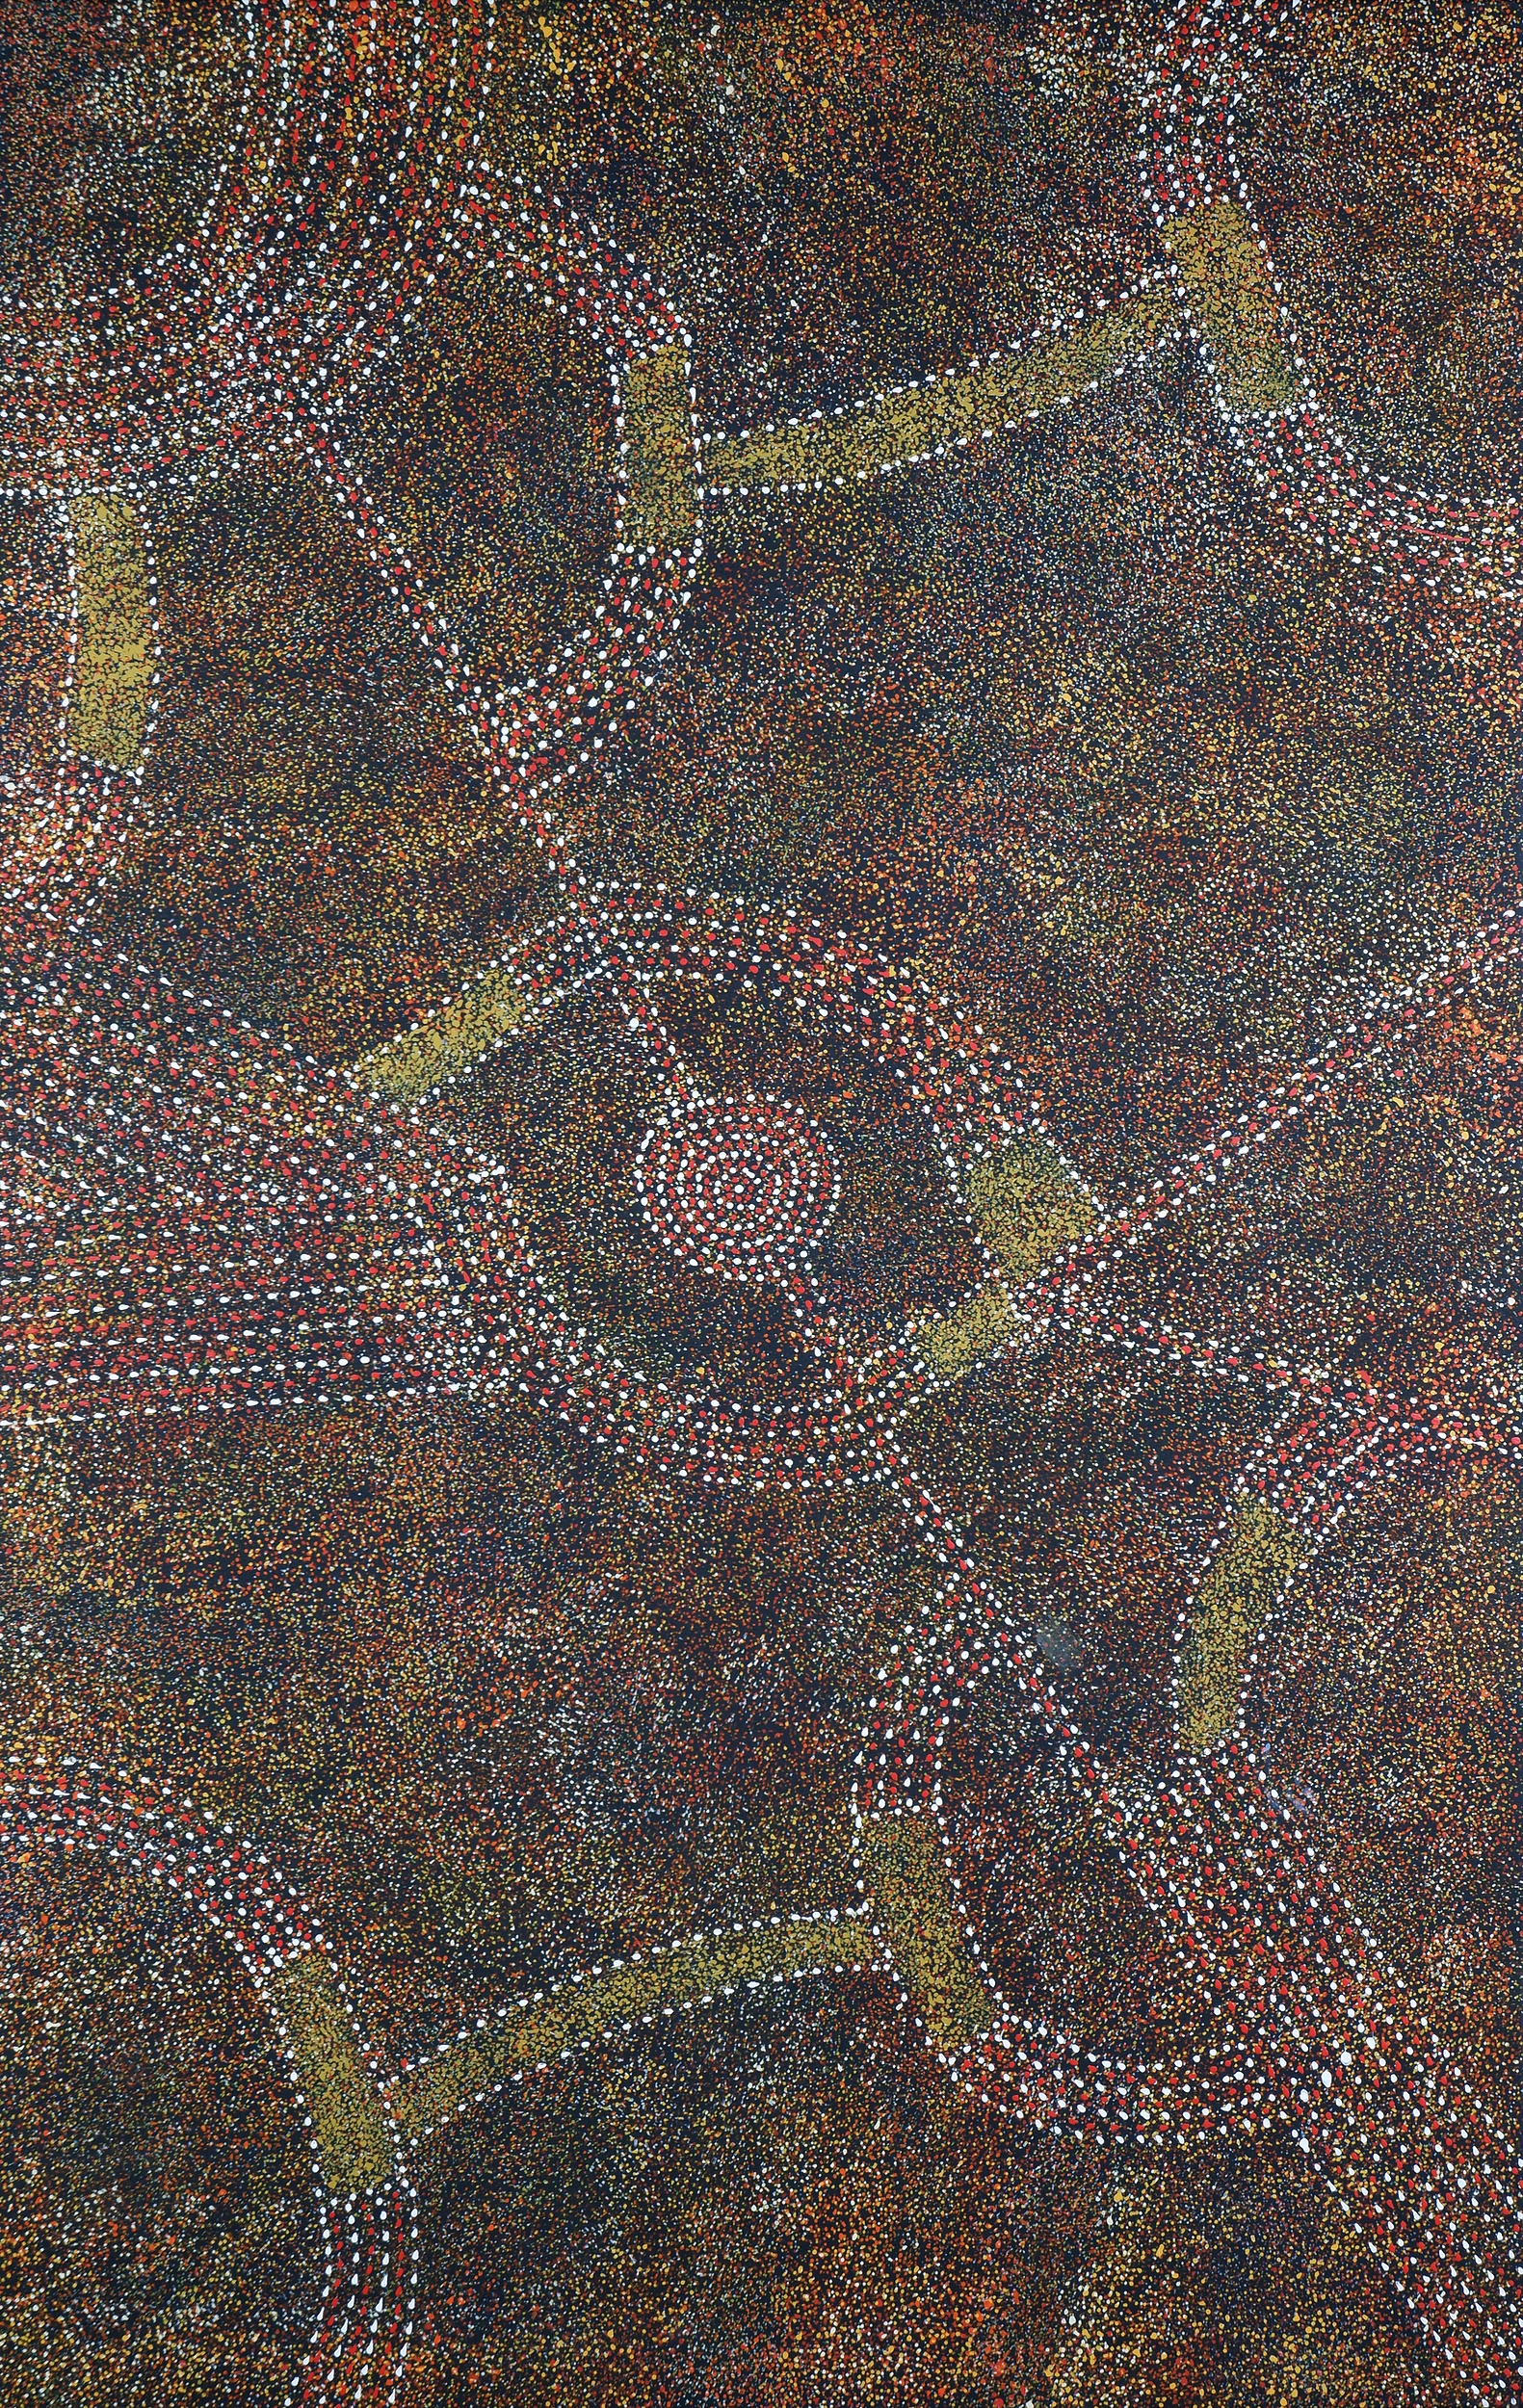 'Gracie Morton Pwerle (c1956), Womens Travelling Tracks, Synthetic Polymer Paint on Canvas'